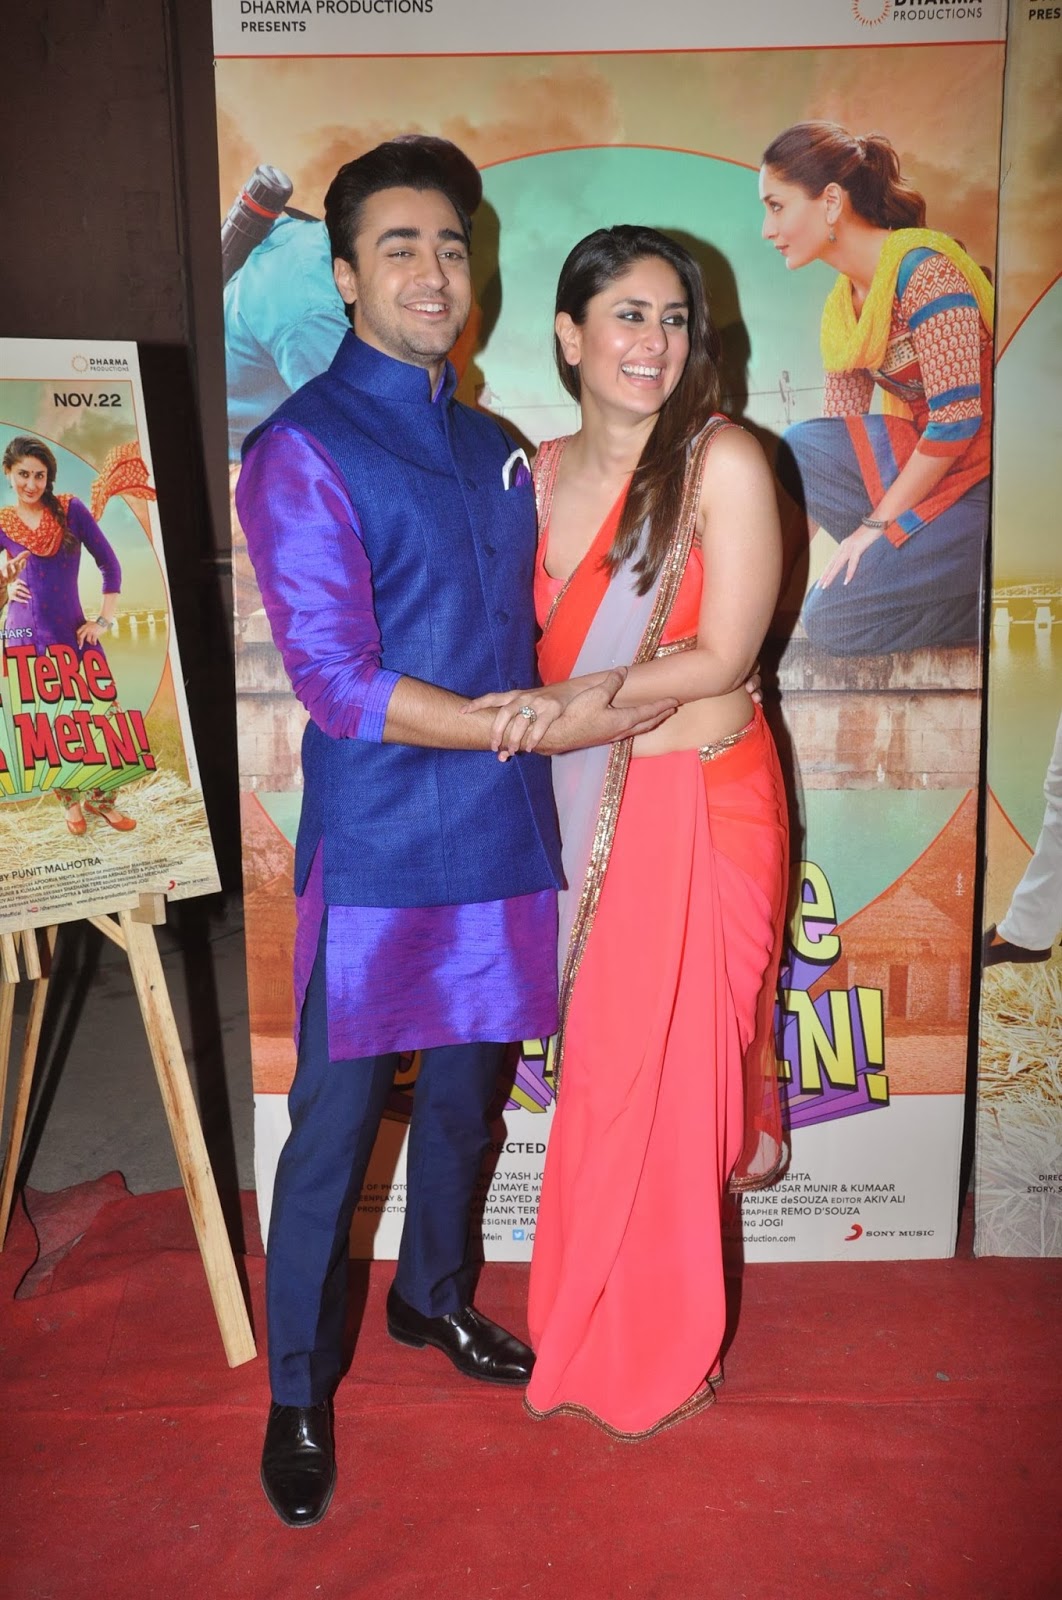 Kareena Kapoor Looks Super Hot In Saree As She Promotes Film Gori Tere Pyaar Mein On The Sets 